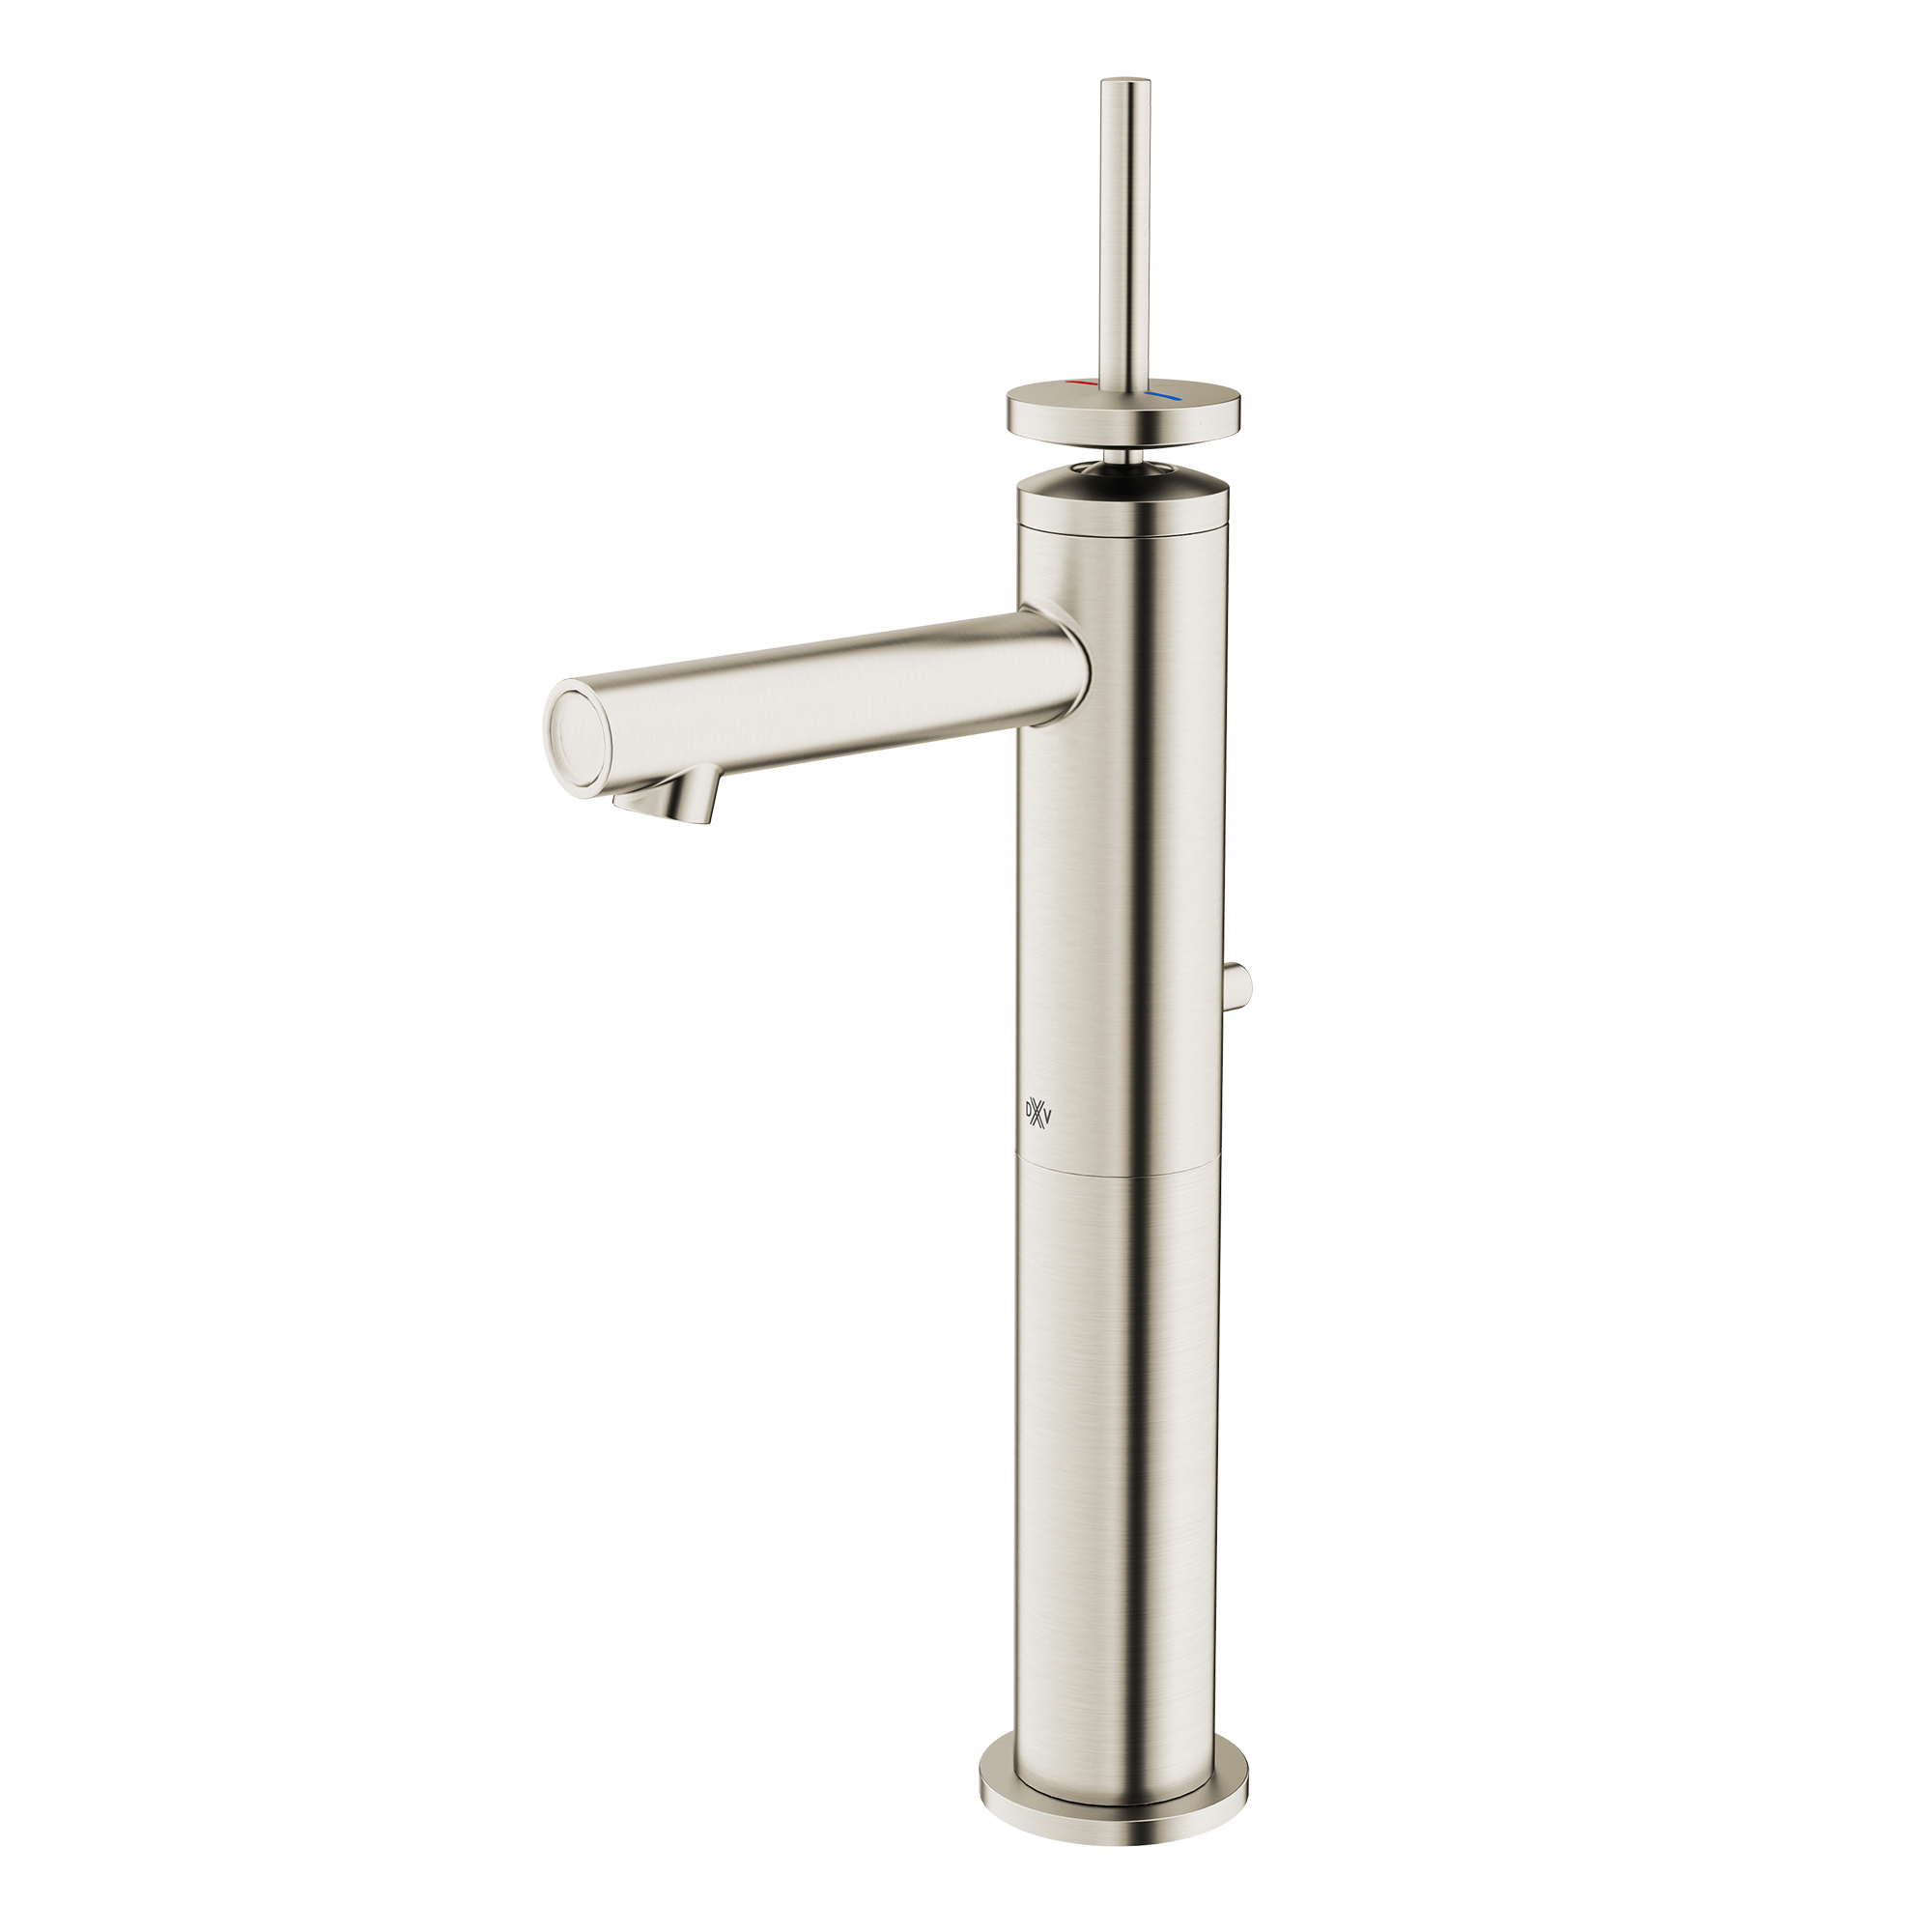 Percy Single Handle Vessel Bathroom Faucet with Indicator Markings and Stem Handle